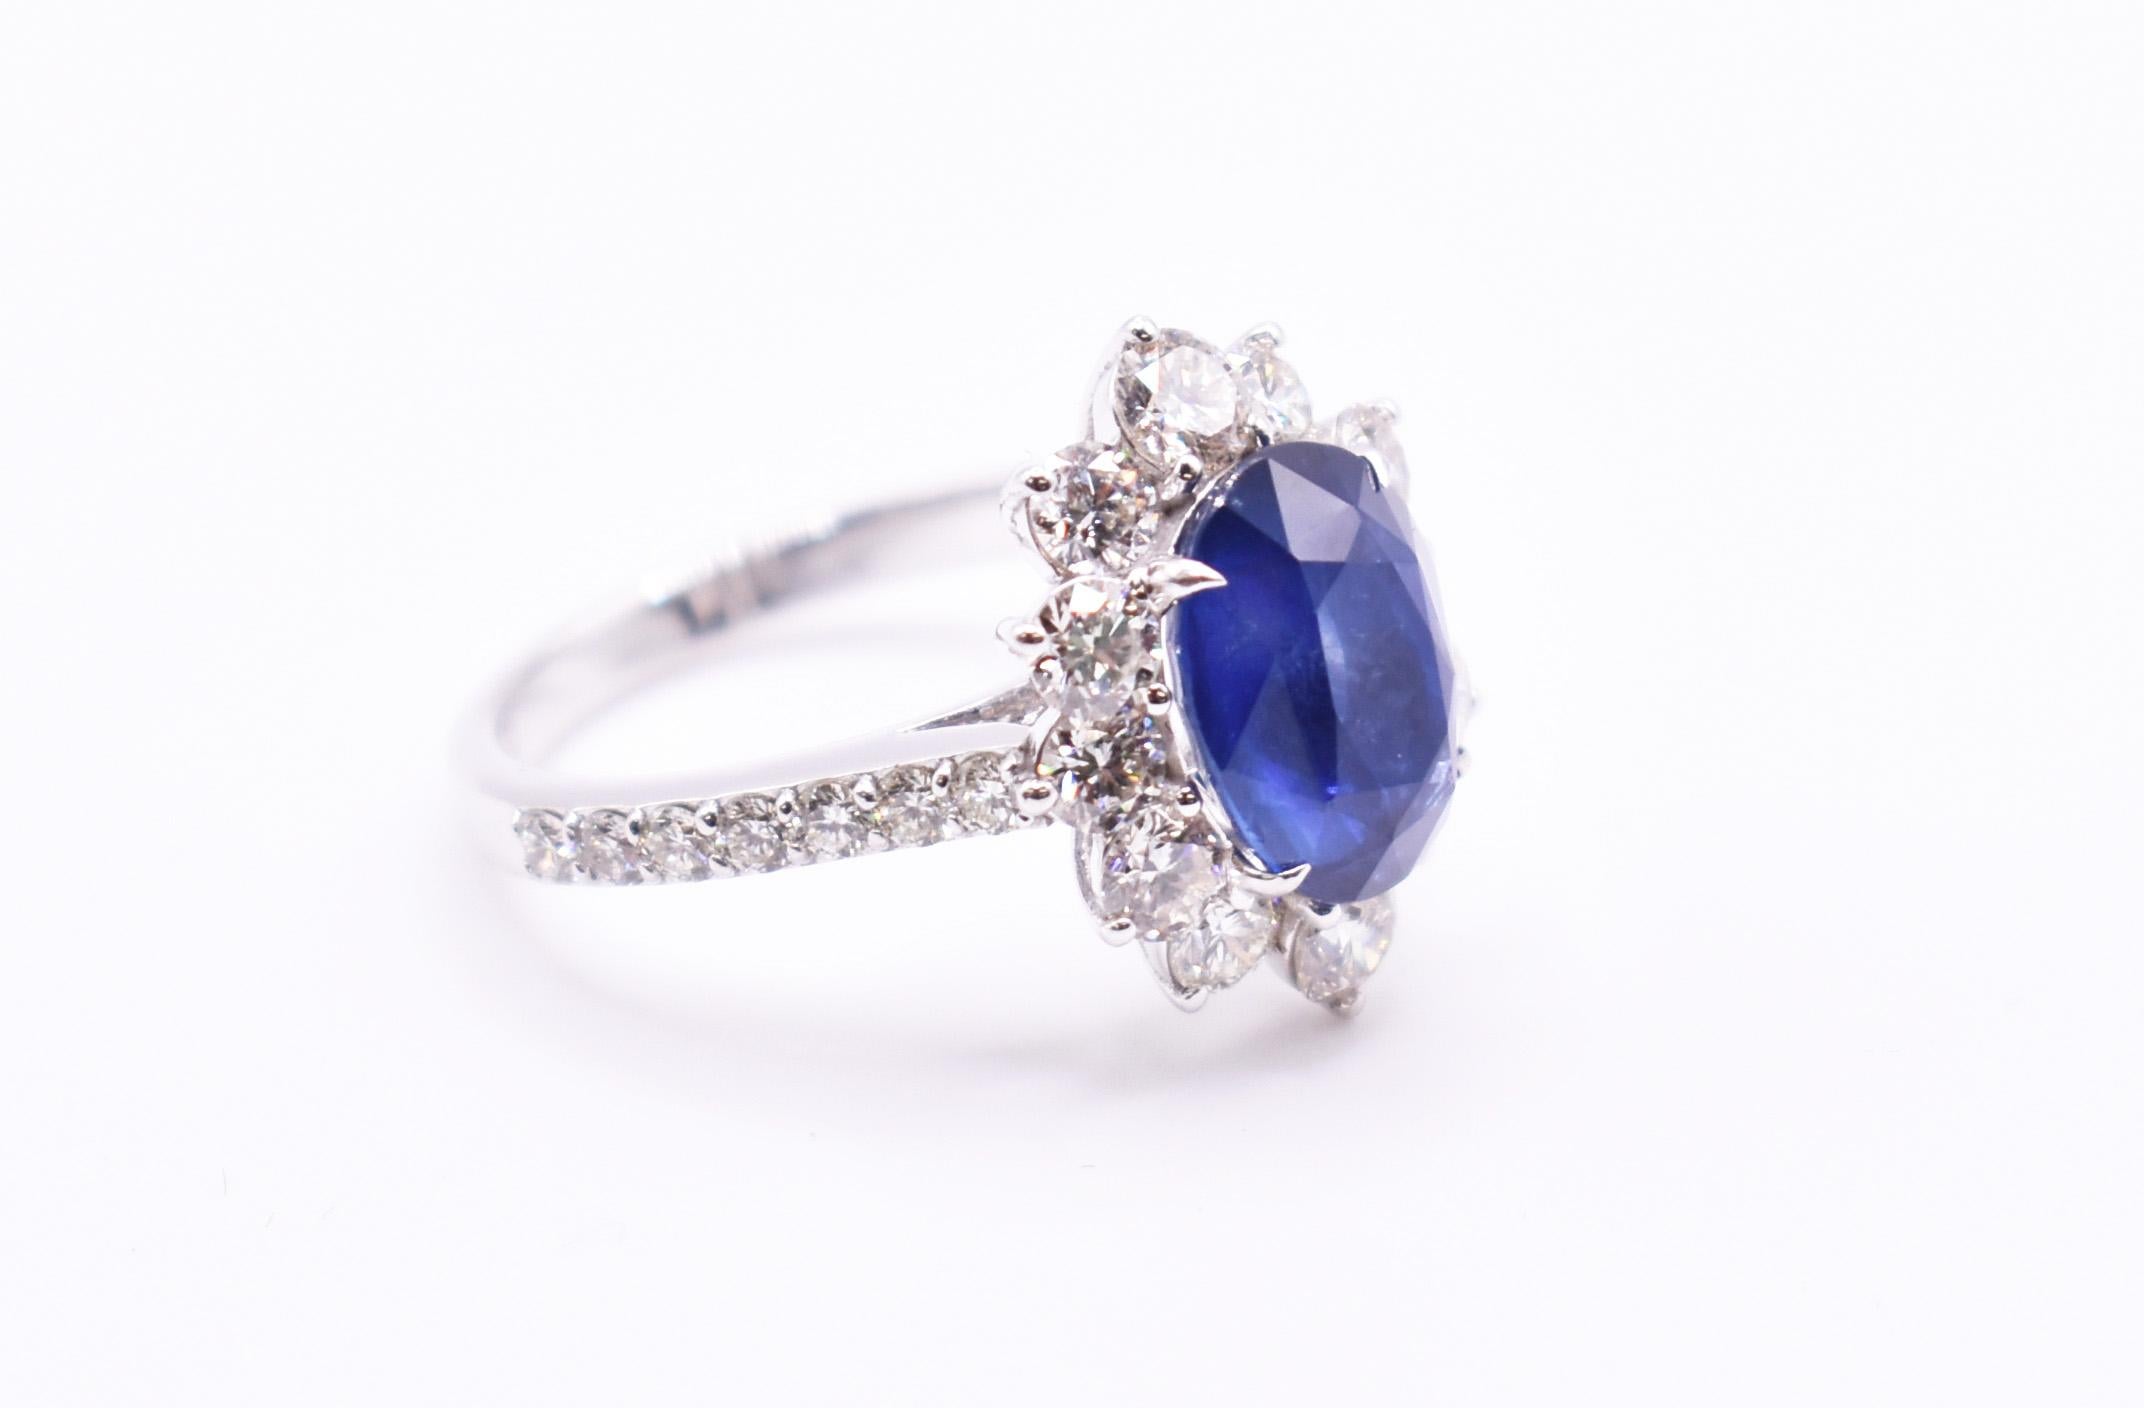 A stunning 18k white gold sapphire & diamond ring, featuring an oval cut sapphire in a prong setting, surrounded by 12 round cut diamonds, with a diamond studded band. Sapphire = 4.19ct Diamonds: 1.84ct. 

UK: O US: 7